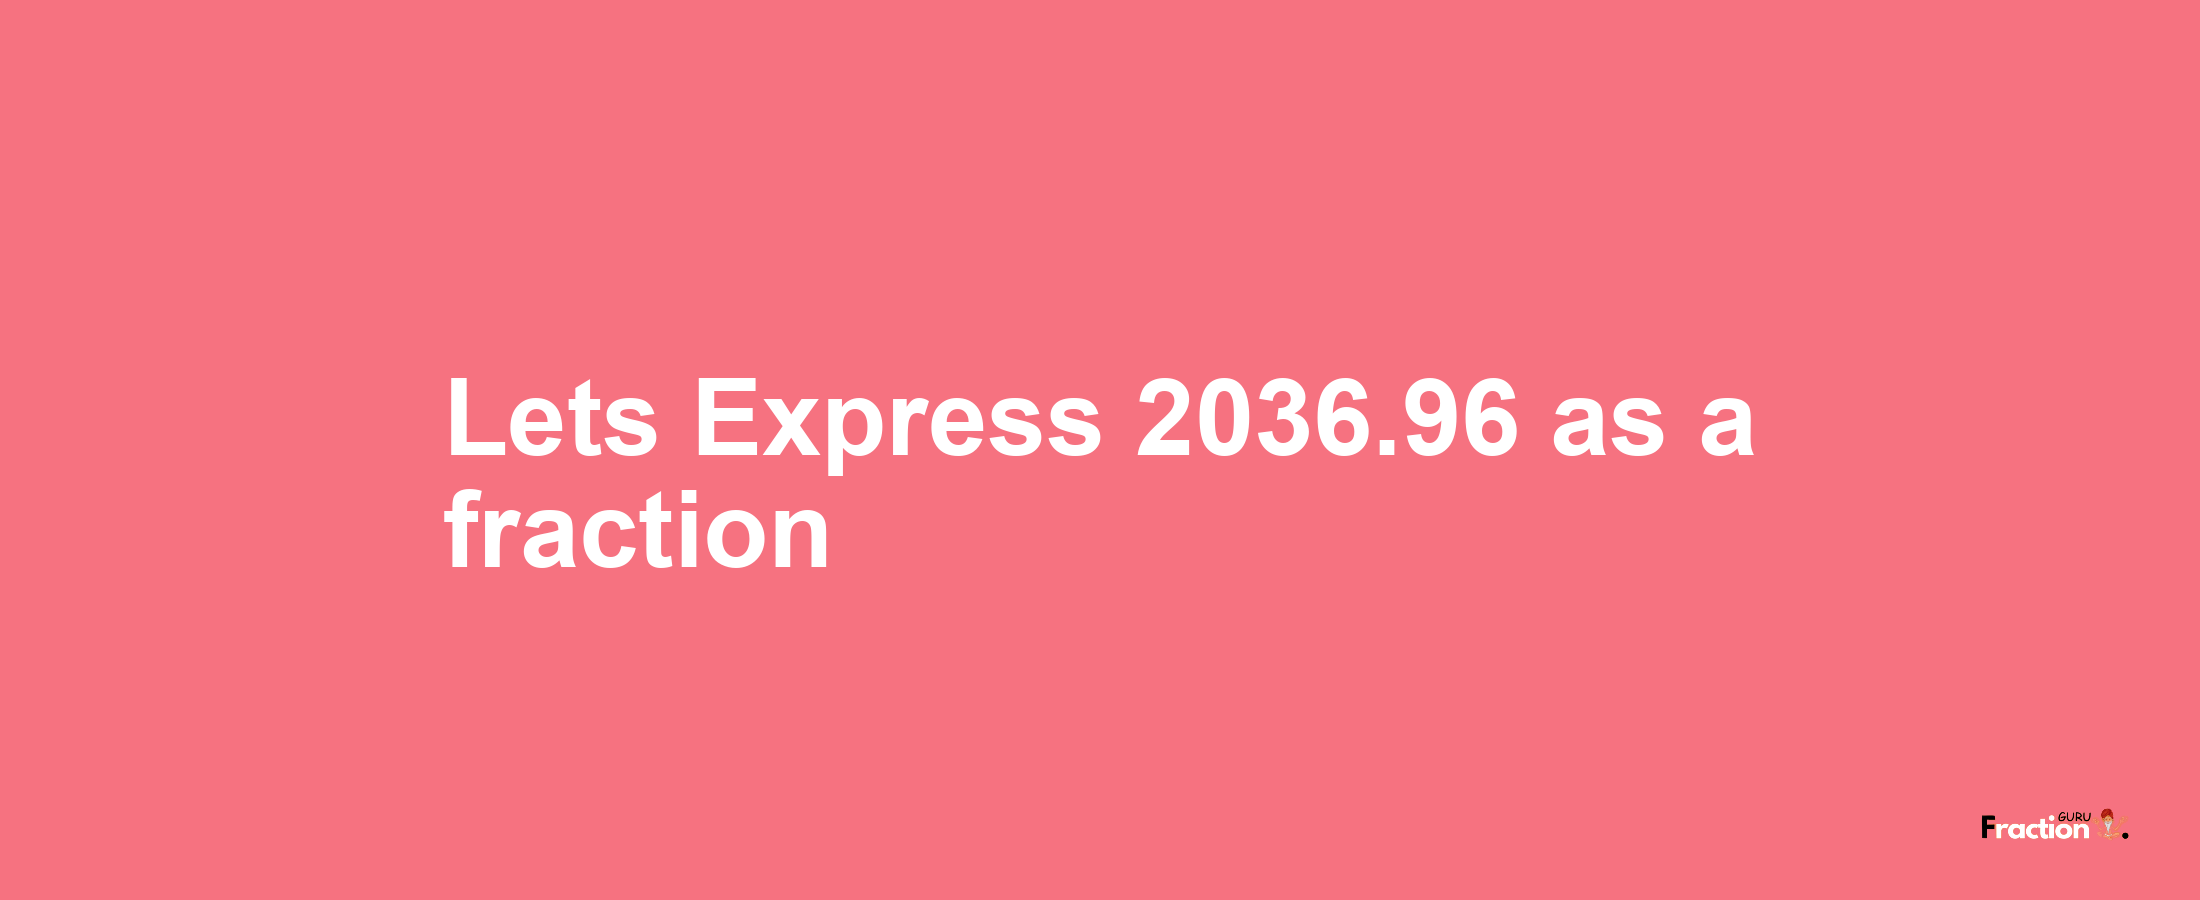 Lets Express 2036.96 as afraction